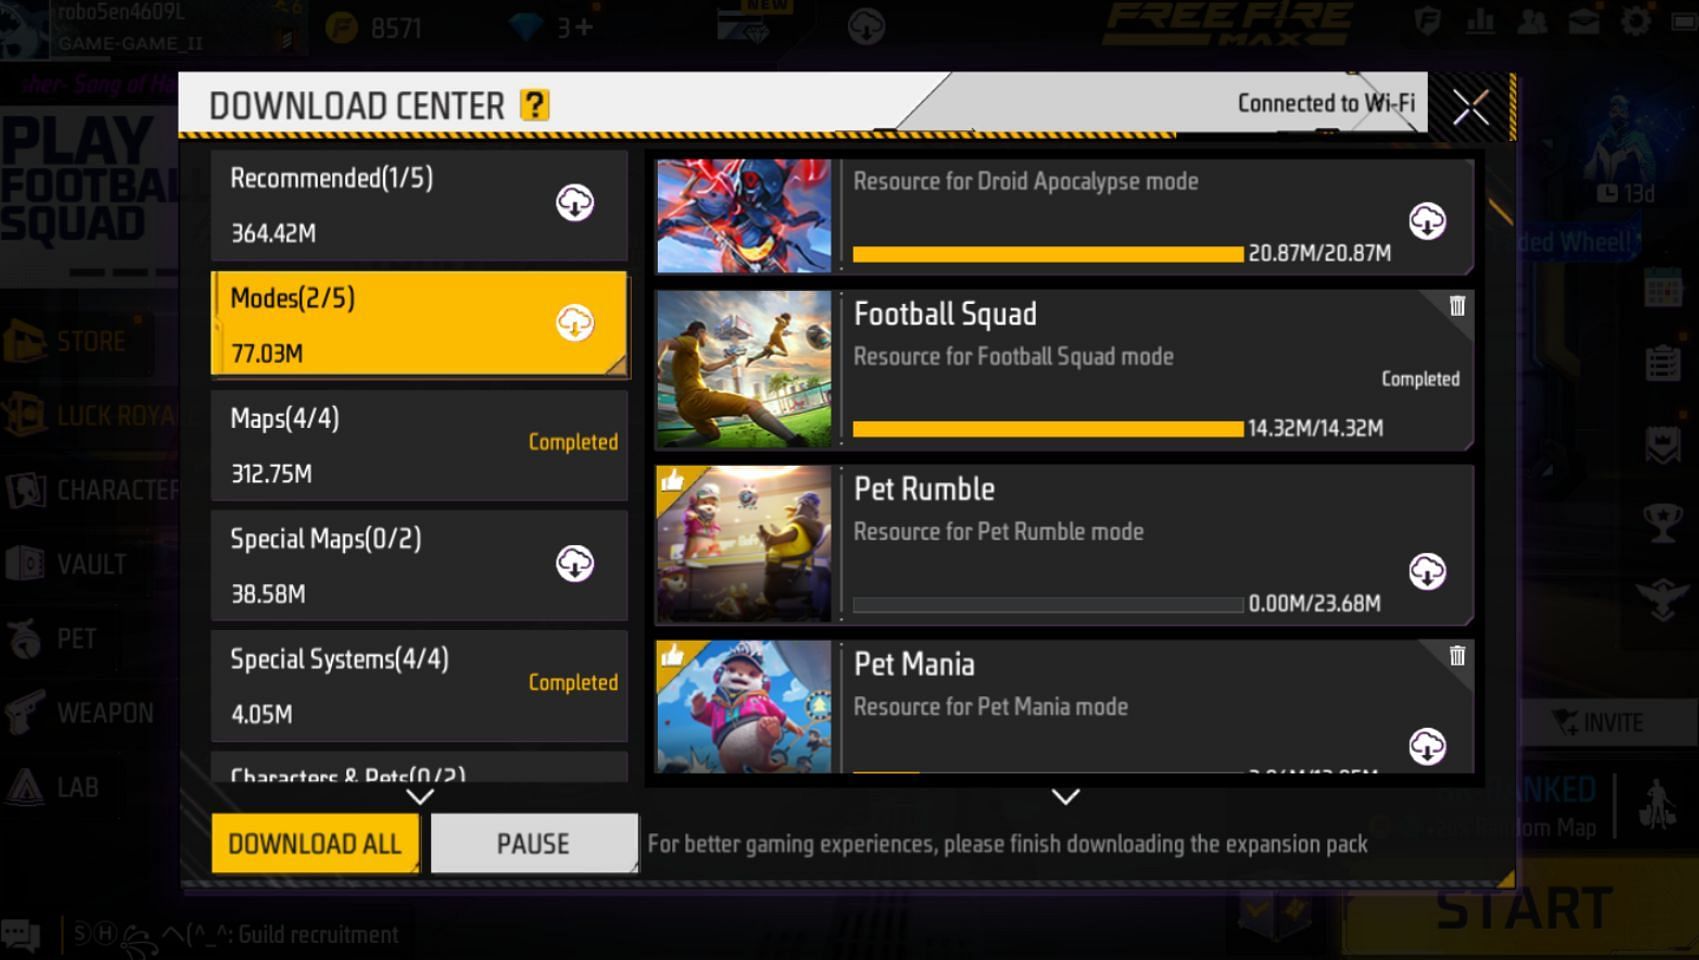 Download the Football Squad mode&#039;s resource file from the &quot;Download Center&quot; (Image via Garena)